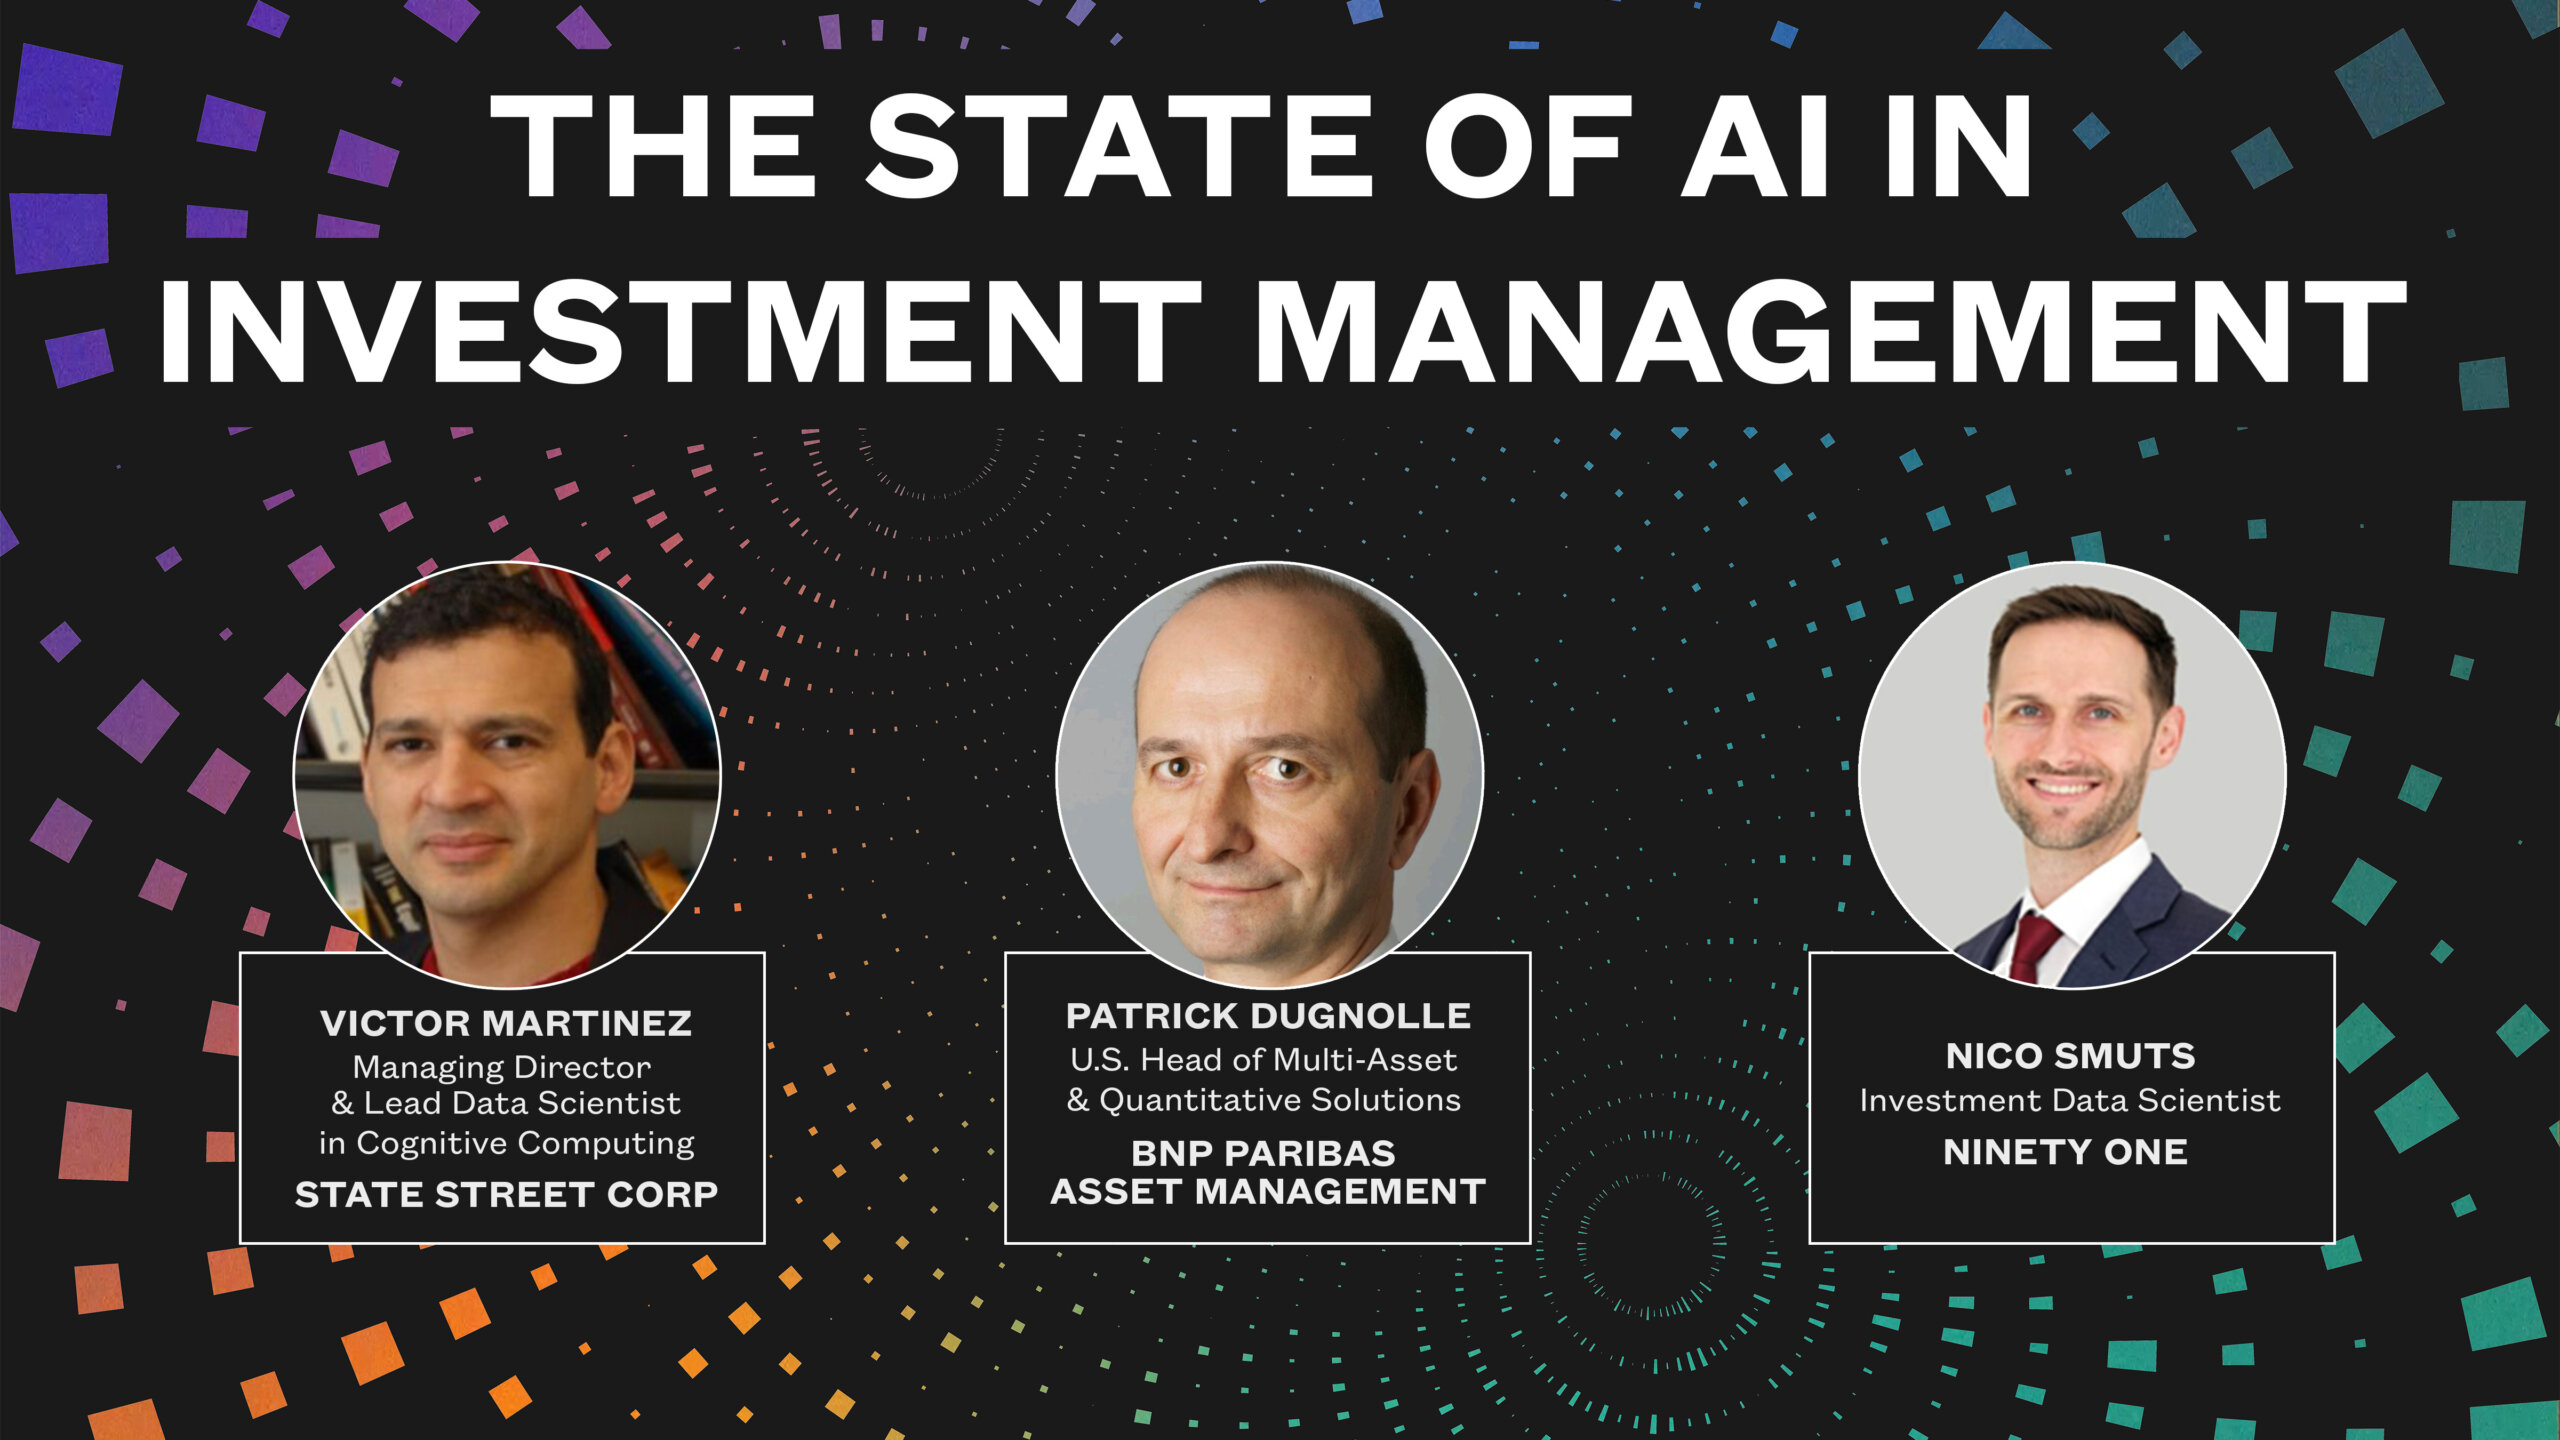 https://ai4.io/dev/blog/2020/04/22/the-state-of-ai-in-investment-management/